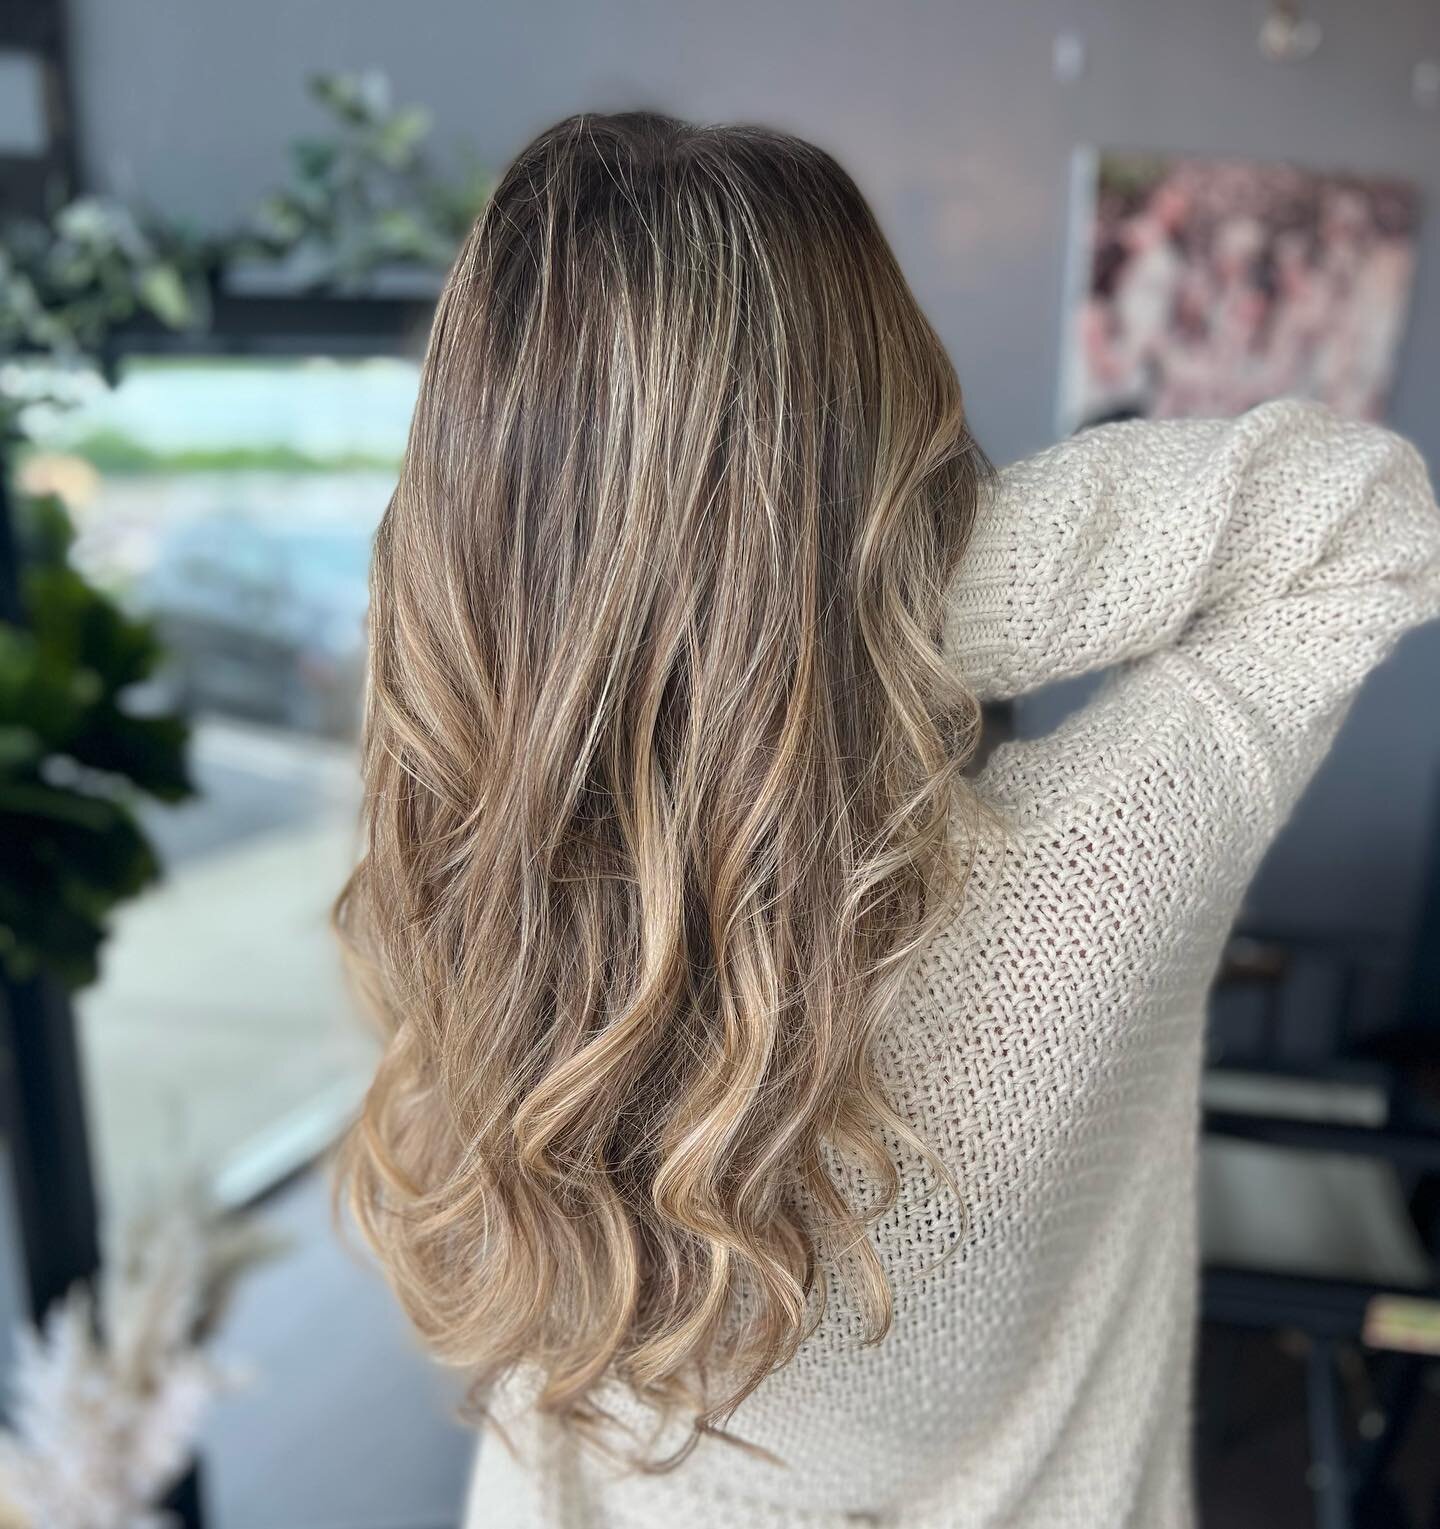 Life is short, make every hair flip count! 
Beautiful color done by Tara! @layersgrl_for_the_love_of_hair 
.
.
.
.
.
.
.
.
.
.

#beauty #hairoftheday #hairstyles #beachywaves #wellaplex #hairinspo #balayage #behindthechair #paintedhair #prettyhaircol